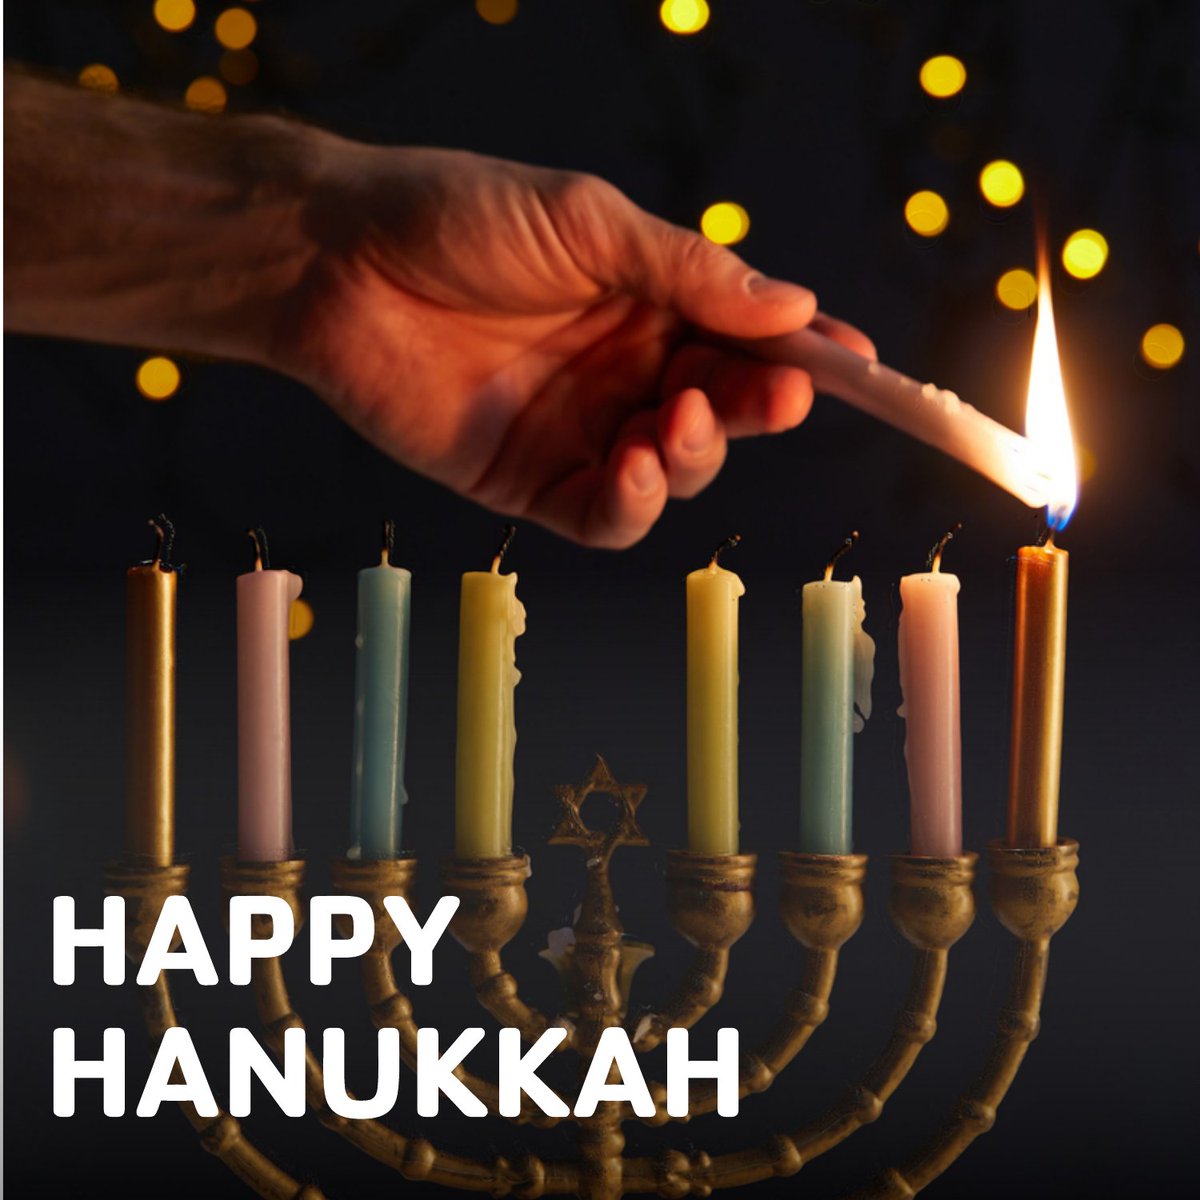 Sending heartfelt Hanukkah wishes from the Y! May the lights of the menorah brighten your home with joy and laughter. Here's to a season filled with warmth, togetherness, and the spirit of Hanukkah. #Hanukkah #HappyHanukkah #Holiday #FORALL #Celebrate